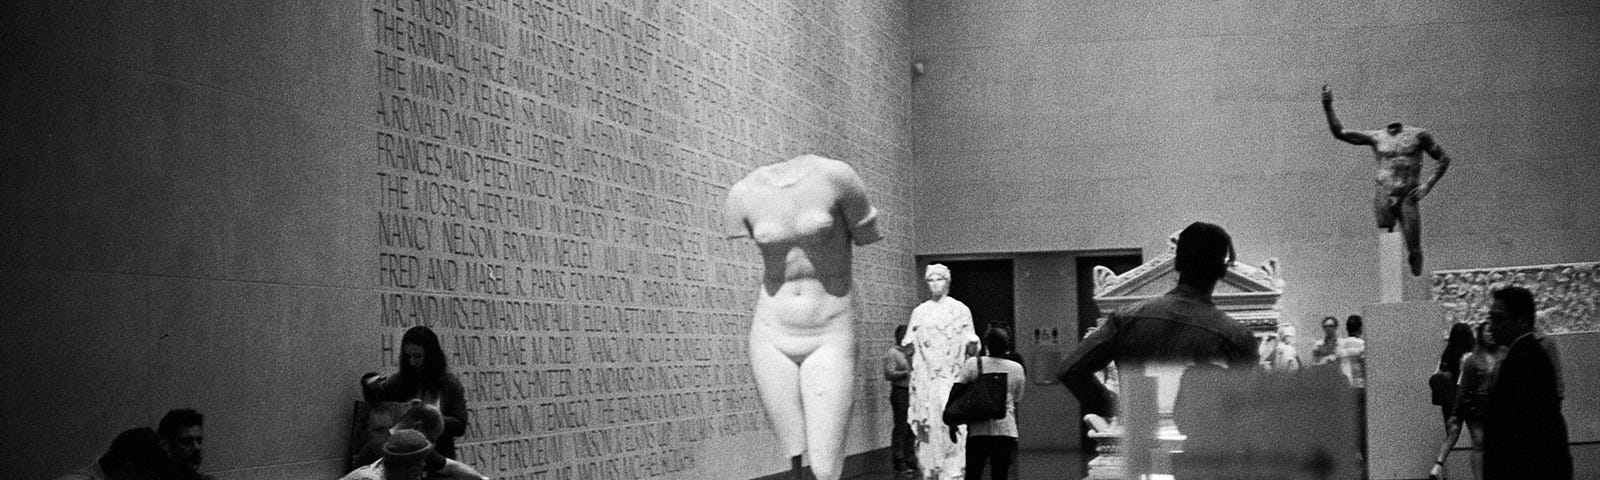 Black and white photo of a museum interior, with a woman’s body statue missing the head, arms, and feet